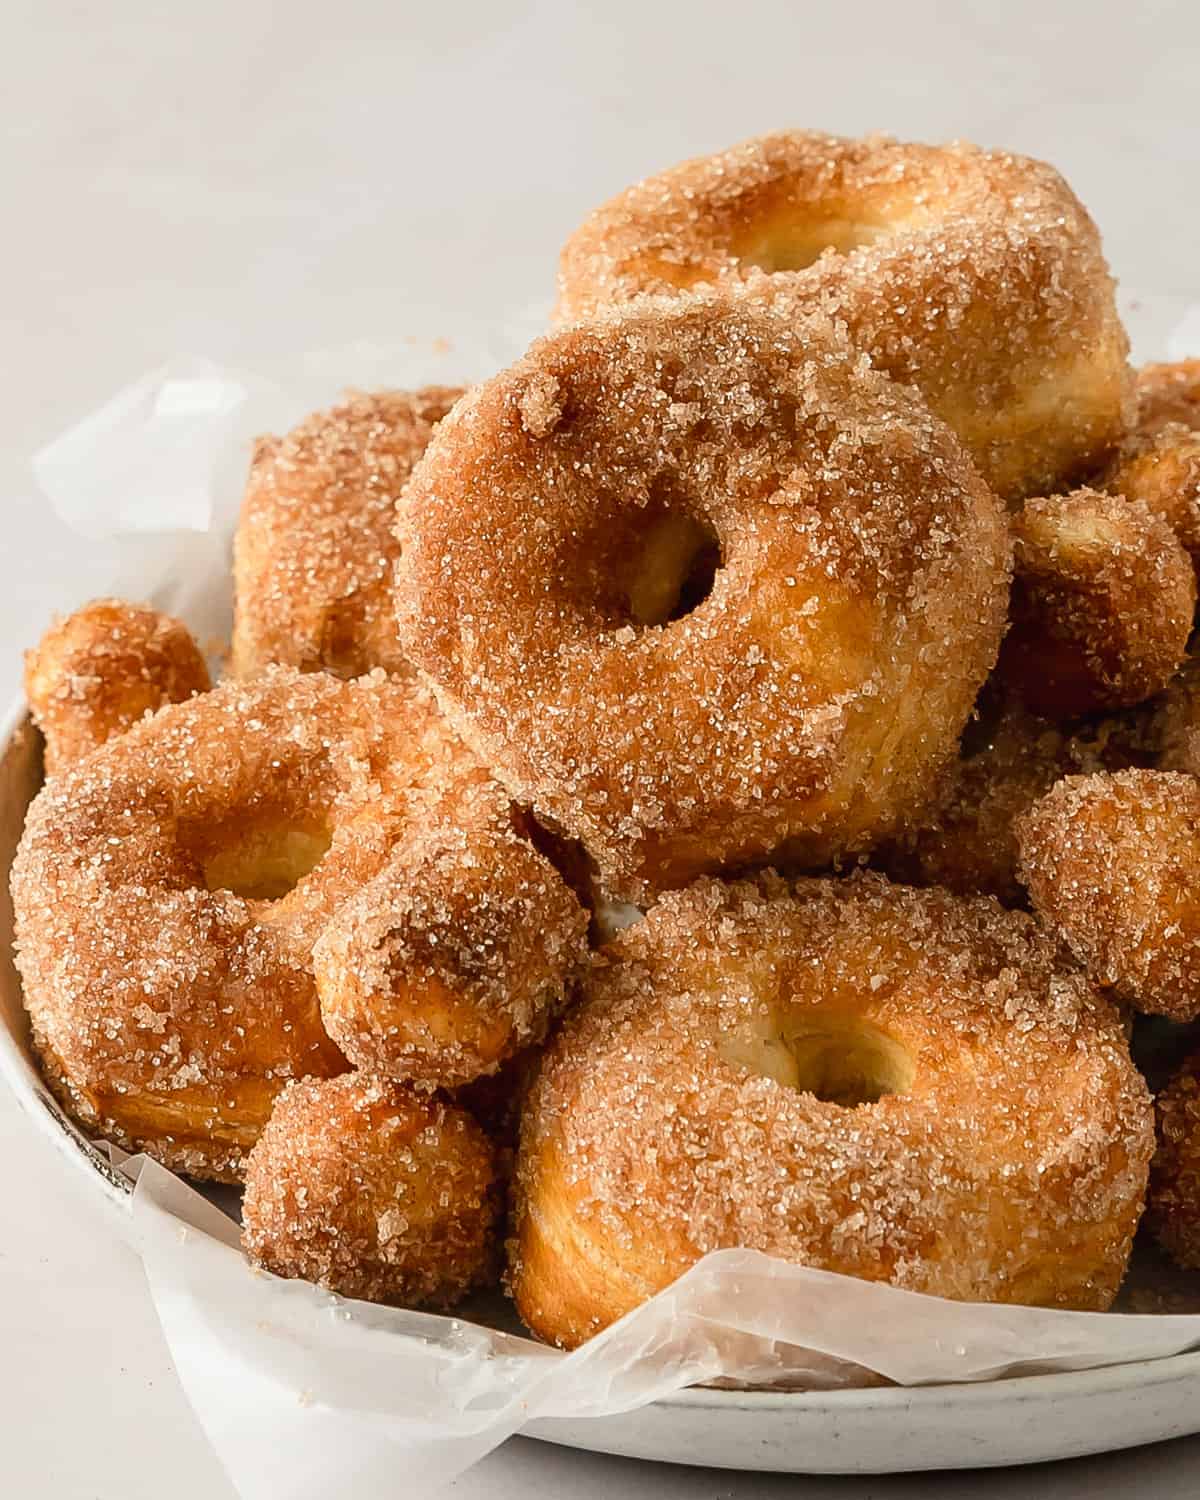 Air fryer biscuit donuts are flaky and fluffy air fryer donuts made using store bought, refrigerated biscuit dough. These easy to make biscuit doughnuts are dipped in melted butter and covered in a sweet and crunchy cinnamon sugar coating. Prep and air fryer these cinnamon sugar biscuit donuts in under 10 minutes. 